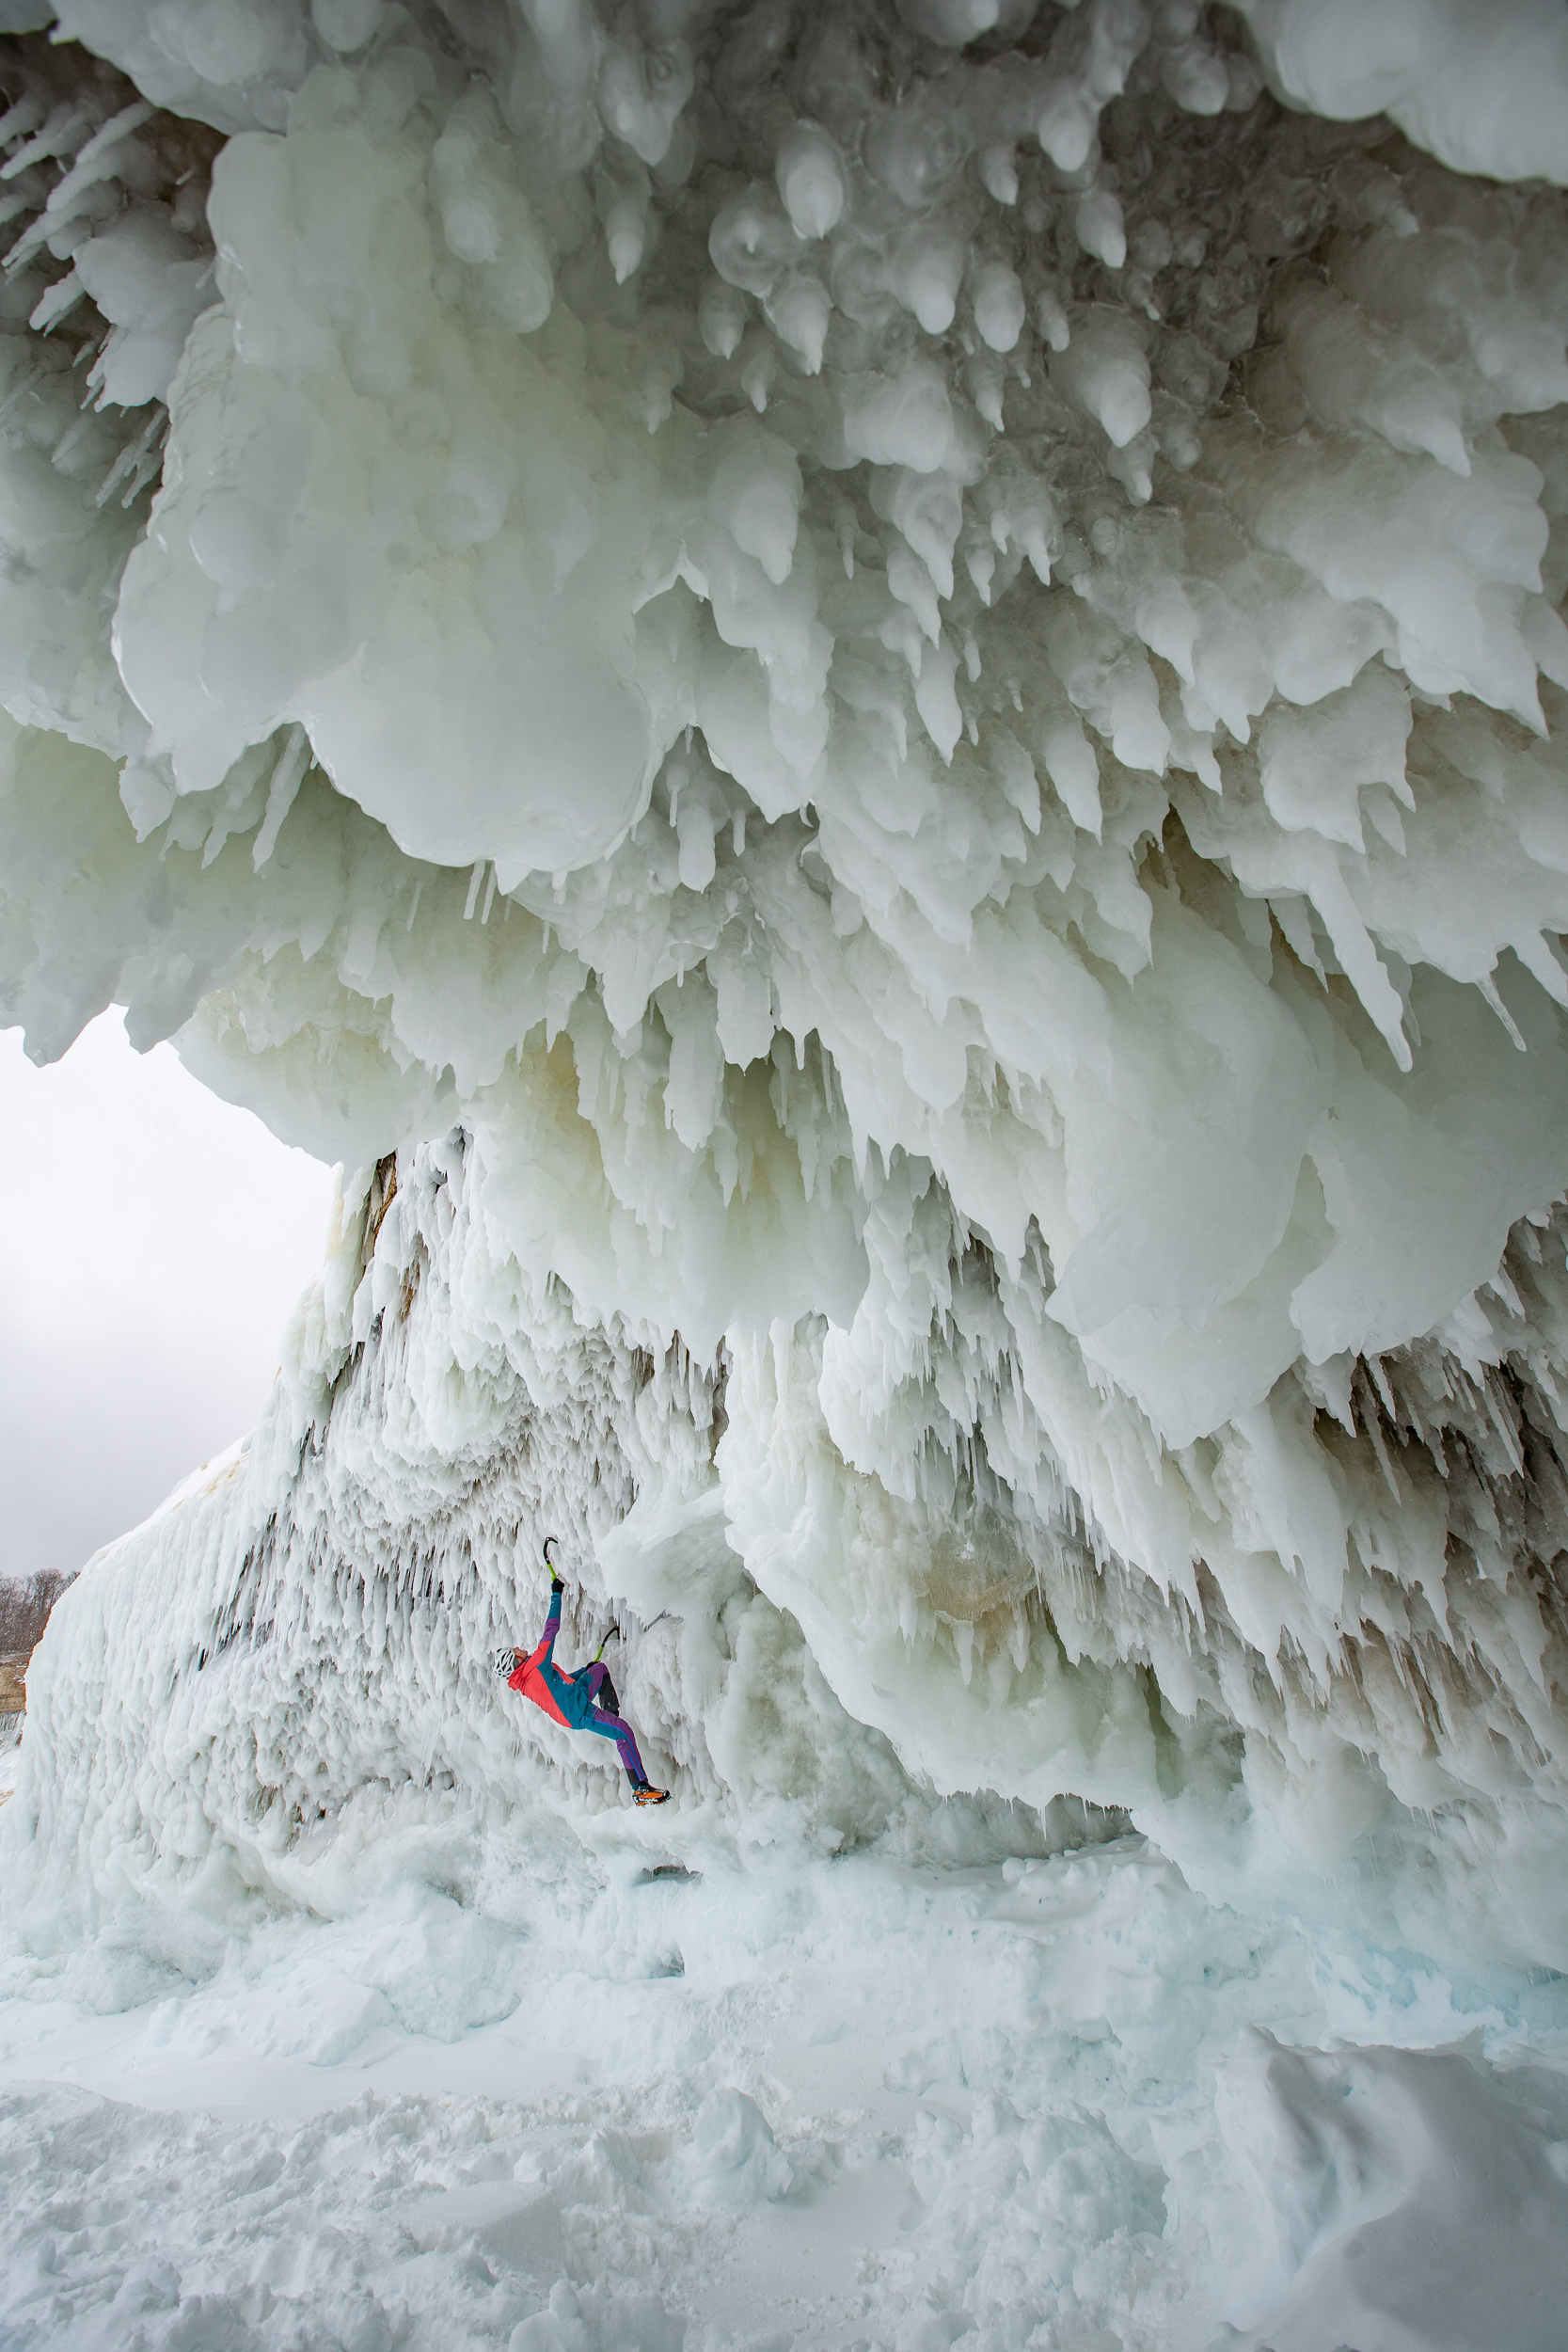  Tim Emmett ice climbing through a steep ice cave, formed on the shores of Lake Superior in Michigan. 